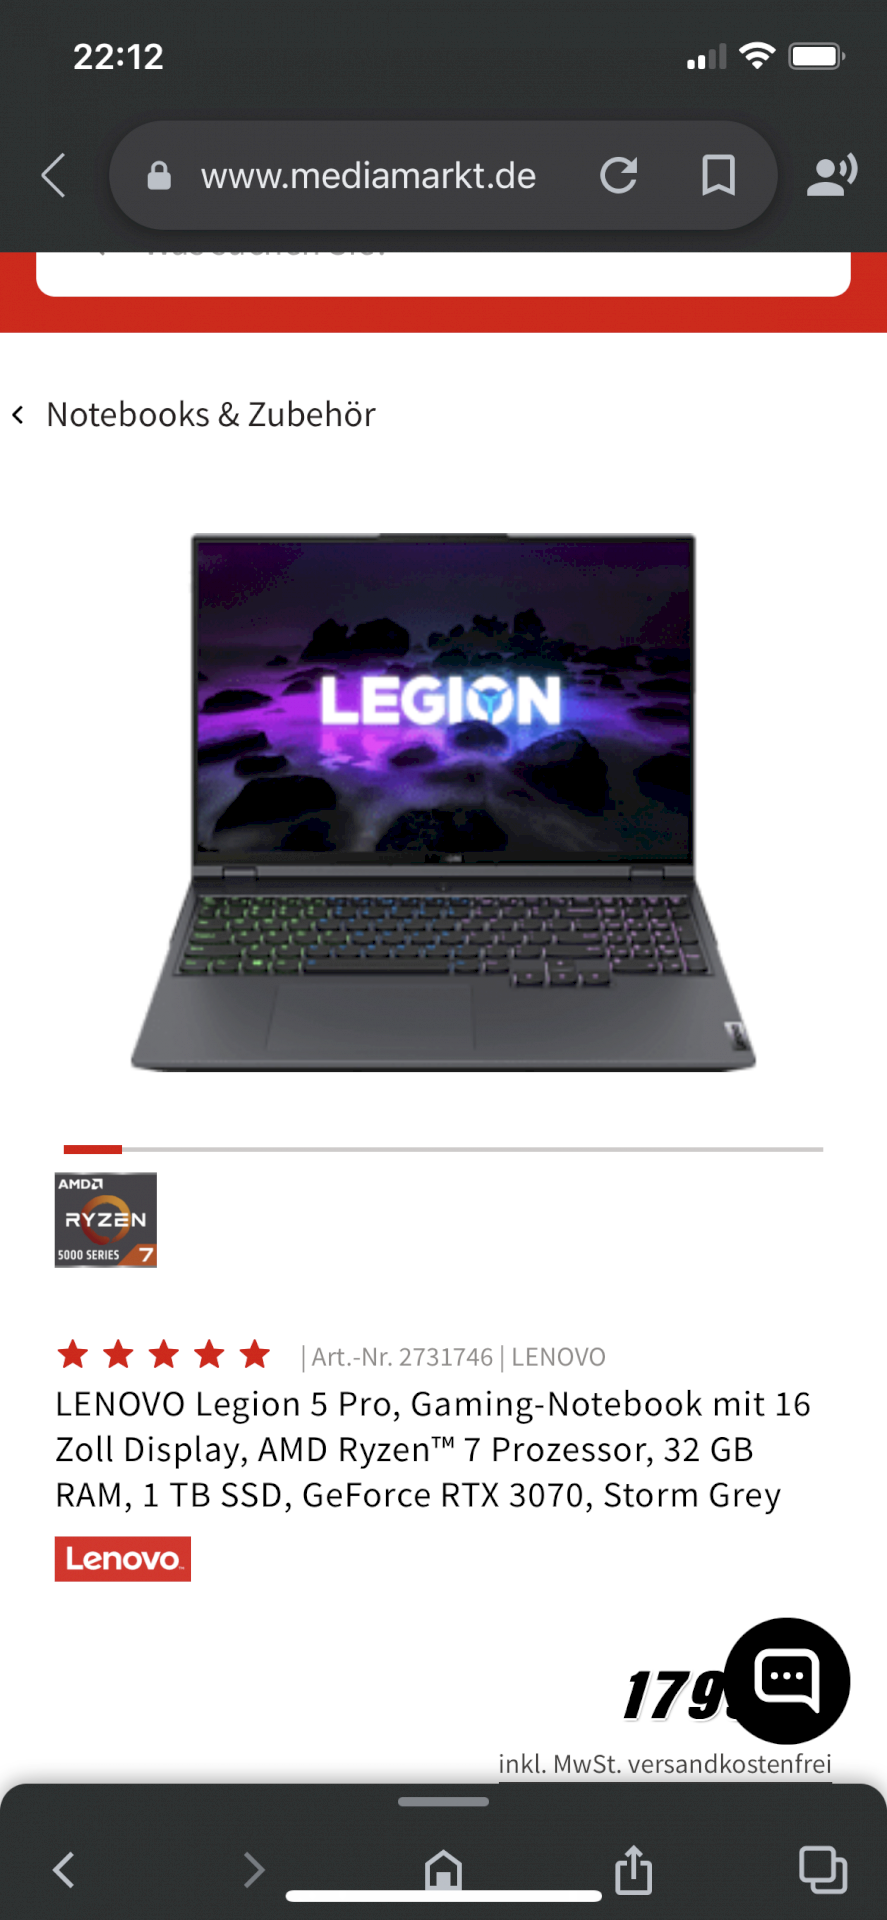 Should I Buy This Gaming Laptop